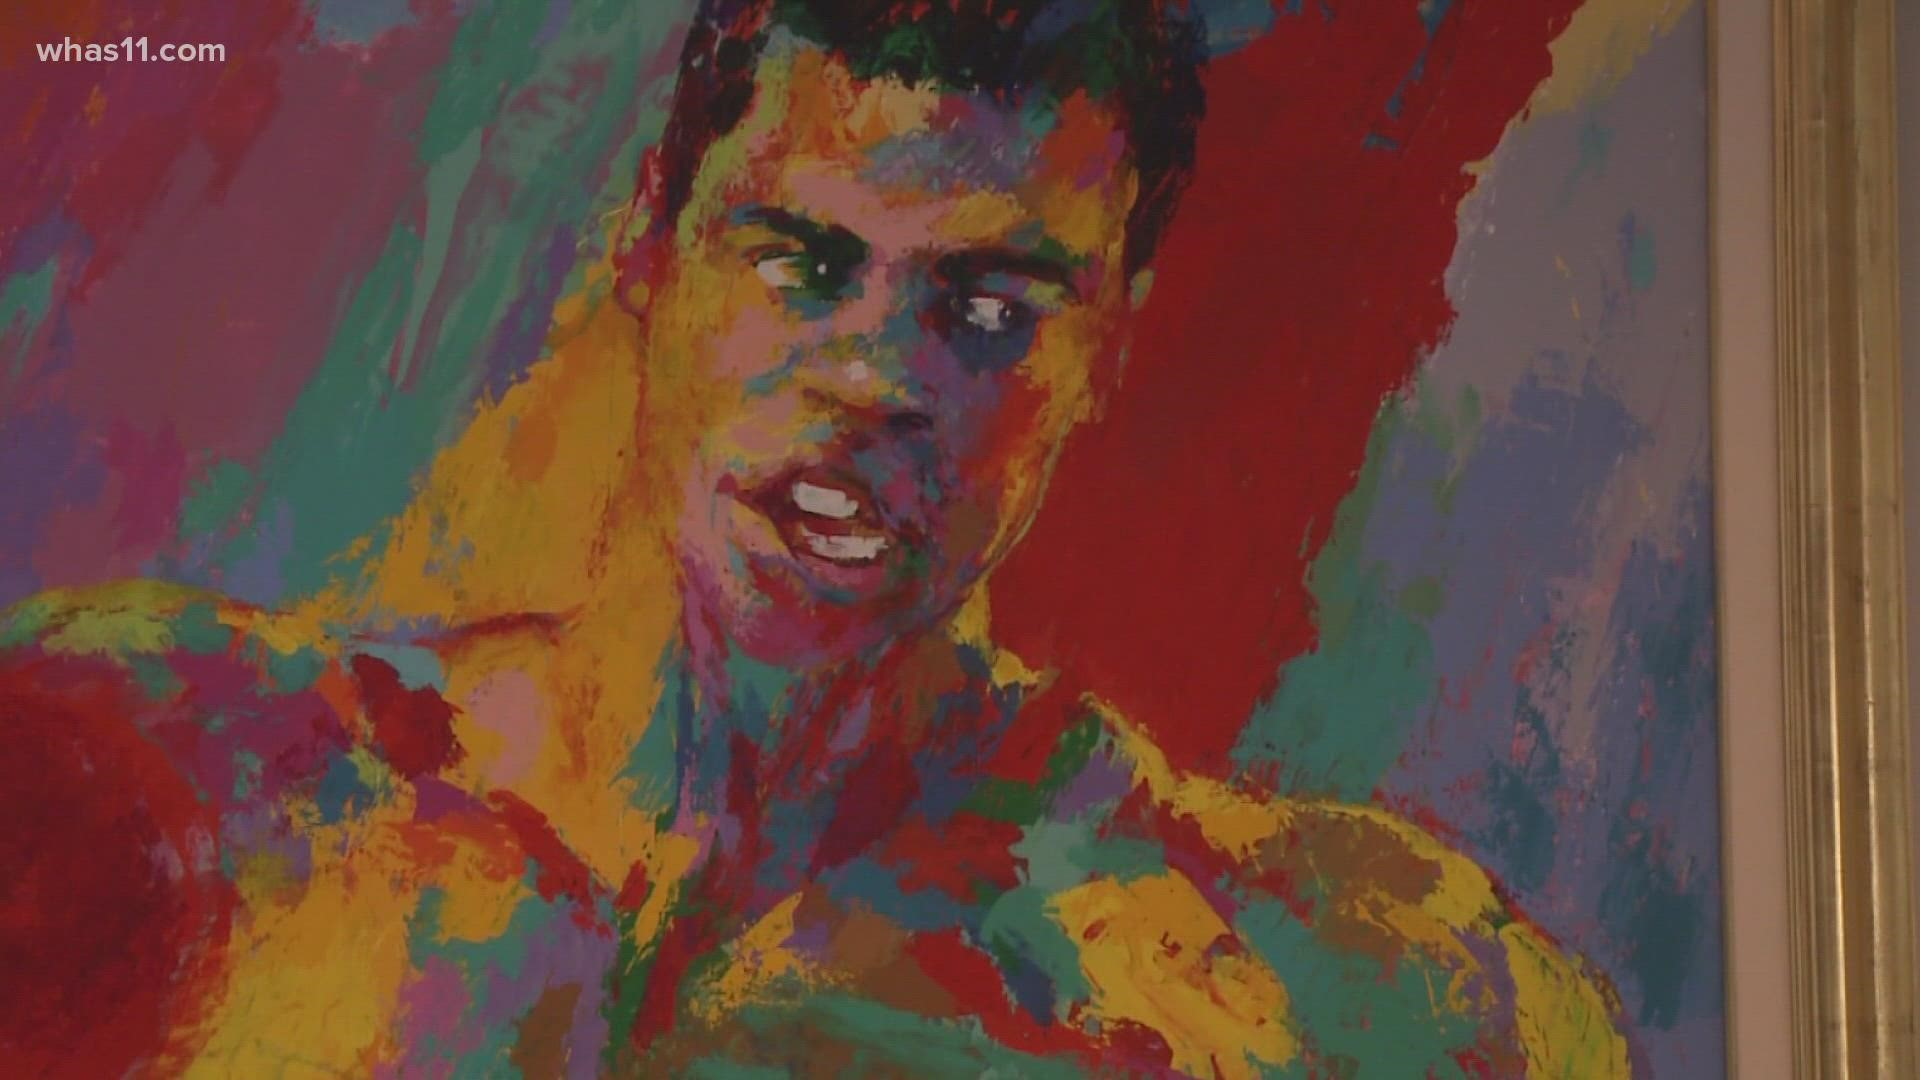 Local officials are launching a public awareness campaign asking for Ali's image to appear on a U.S. postage stamp.